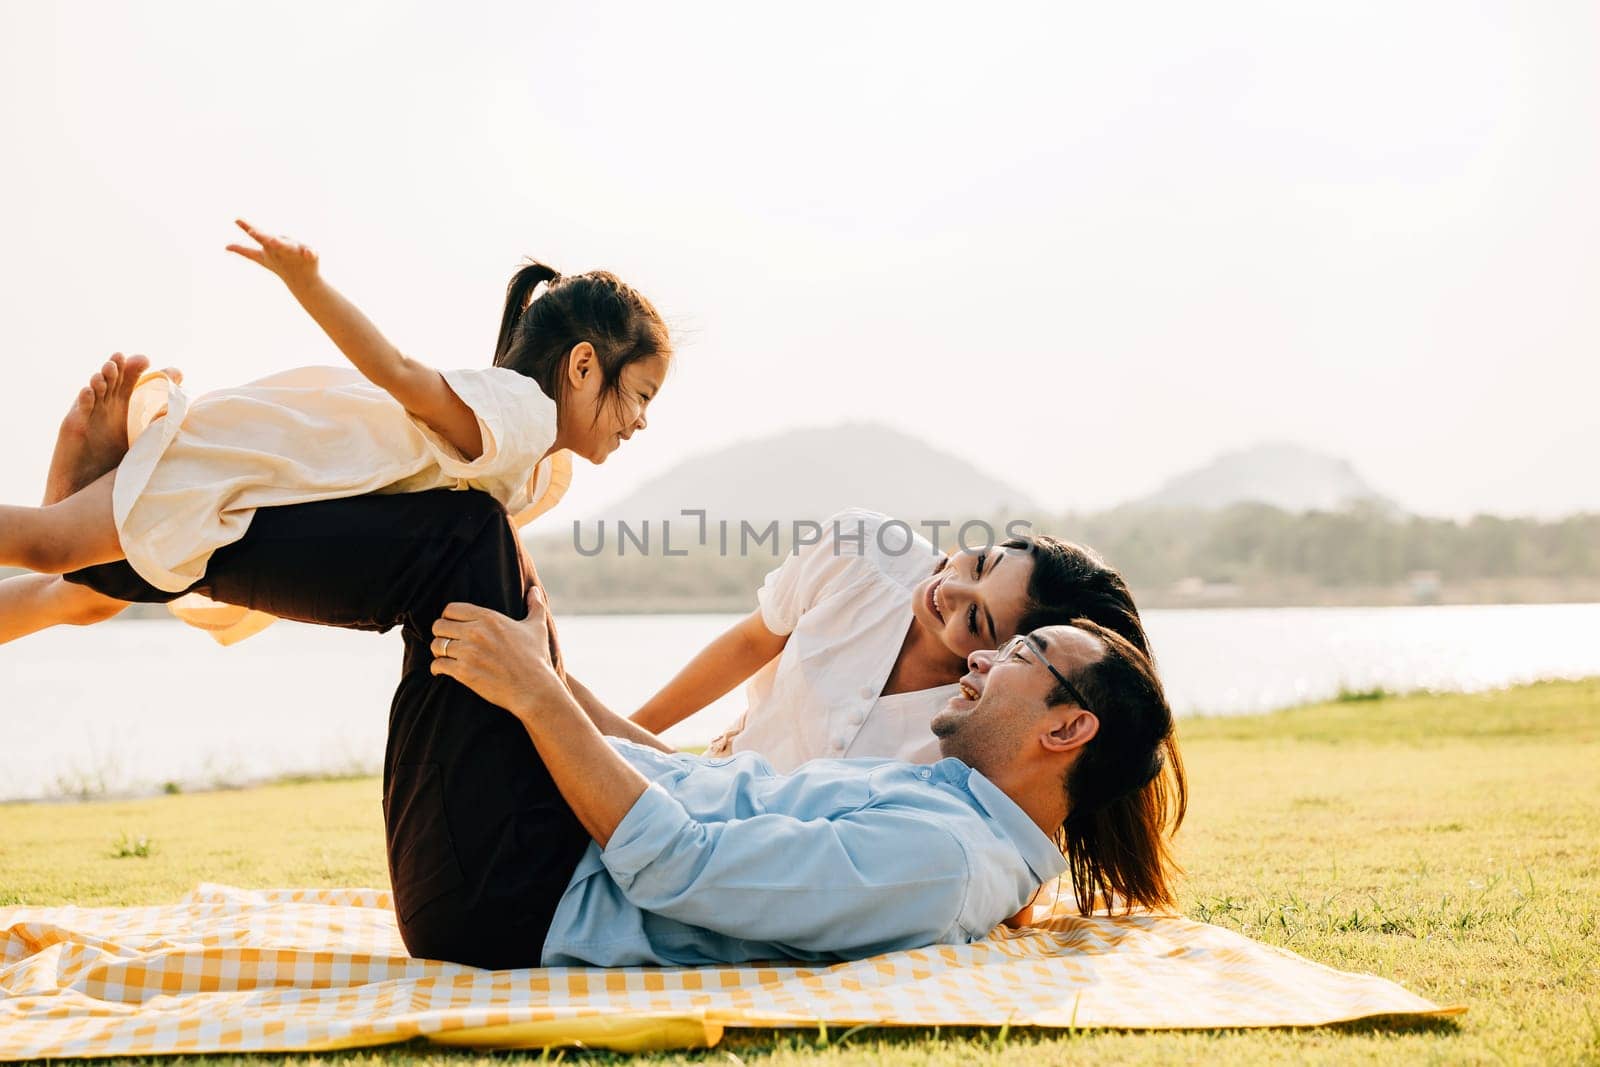 A playful family day in the park. Father lifts his daughter high, as she joyfully opens her arms and flies like a plane, while mother looks on with happiness. Family fun captured in a photograph